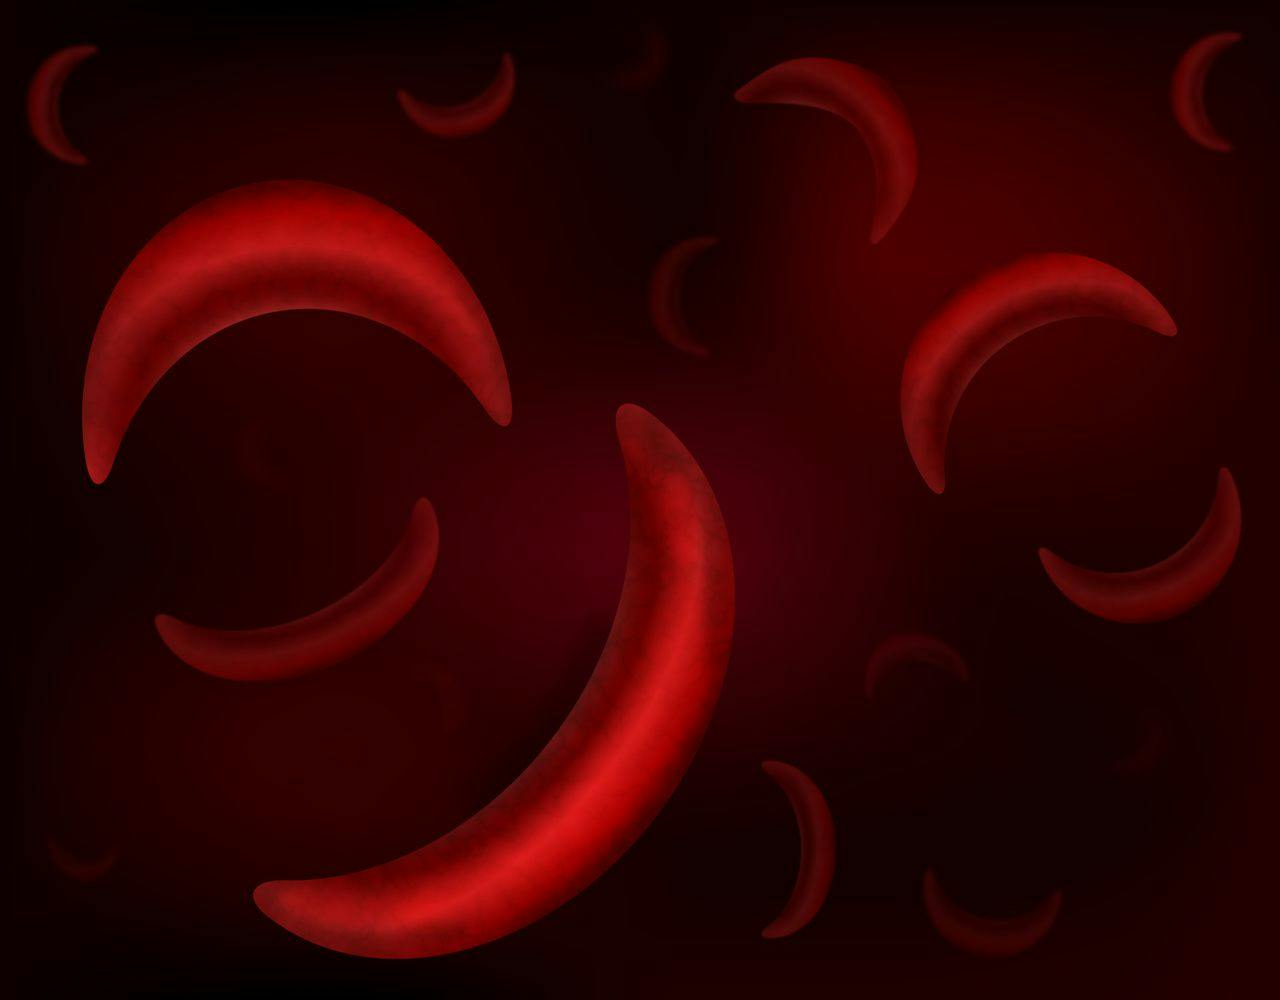 Sickle Cell Trait Linked to Increased Leukemia Risk